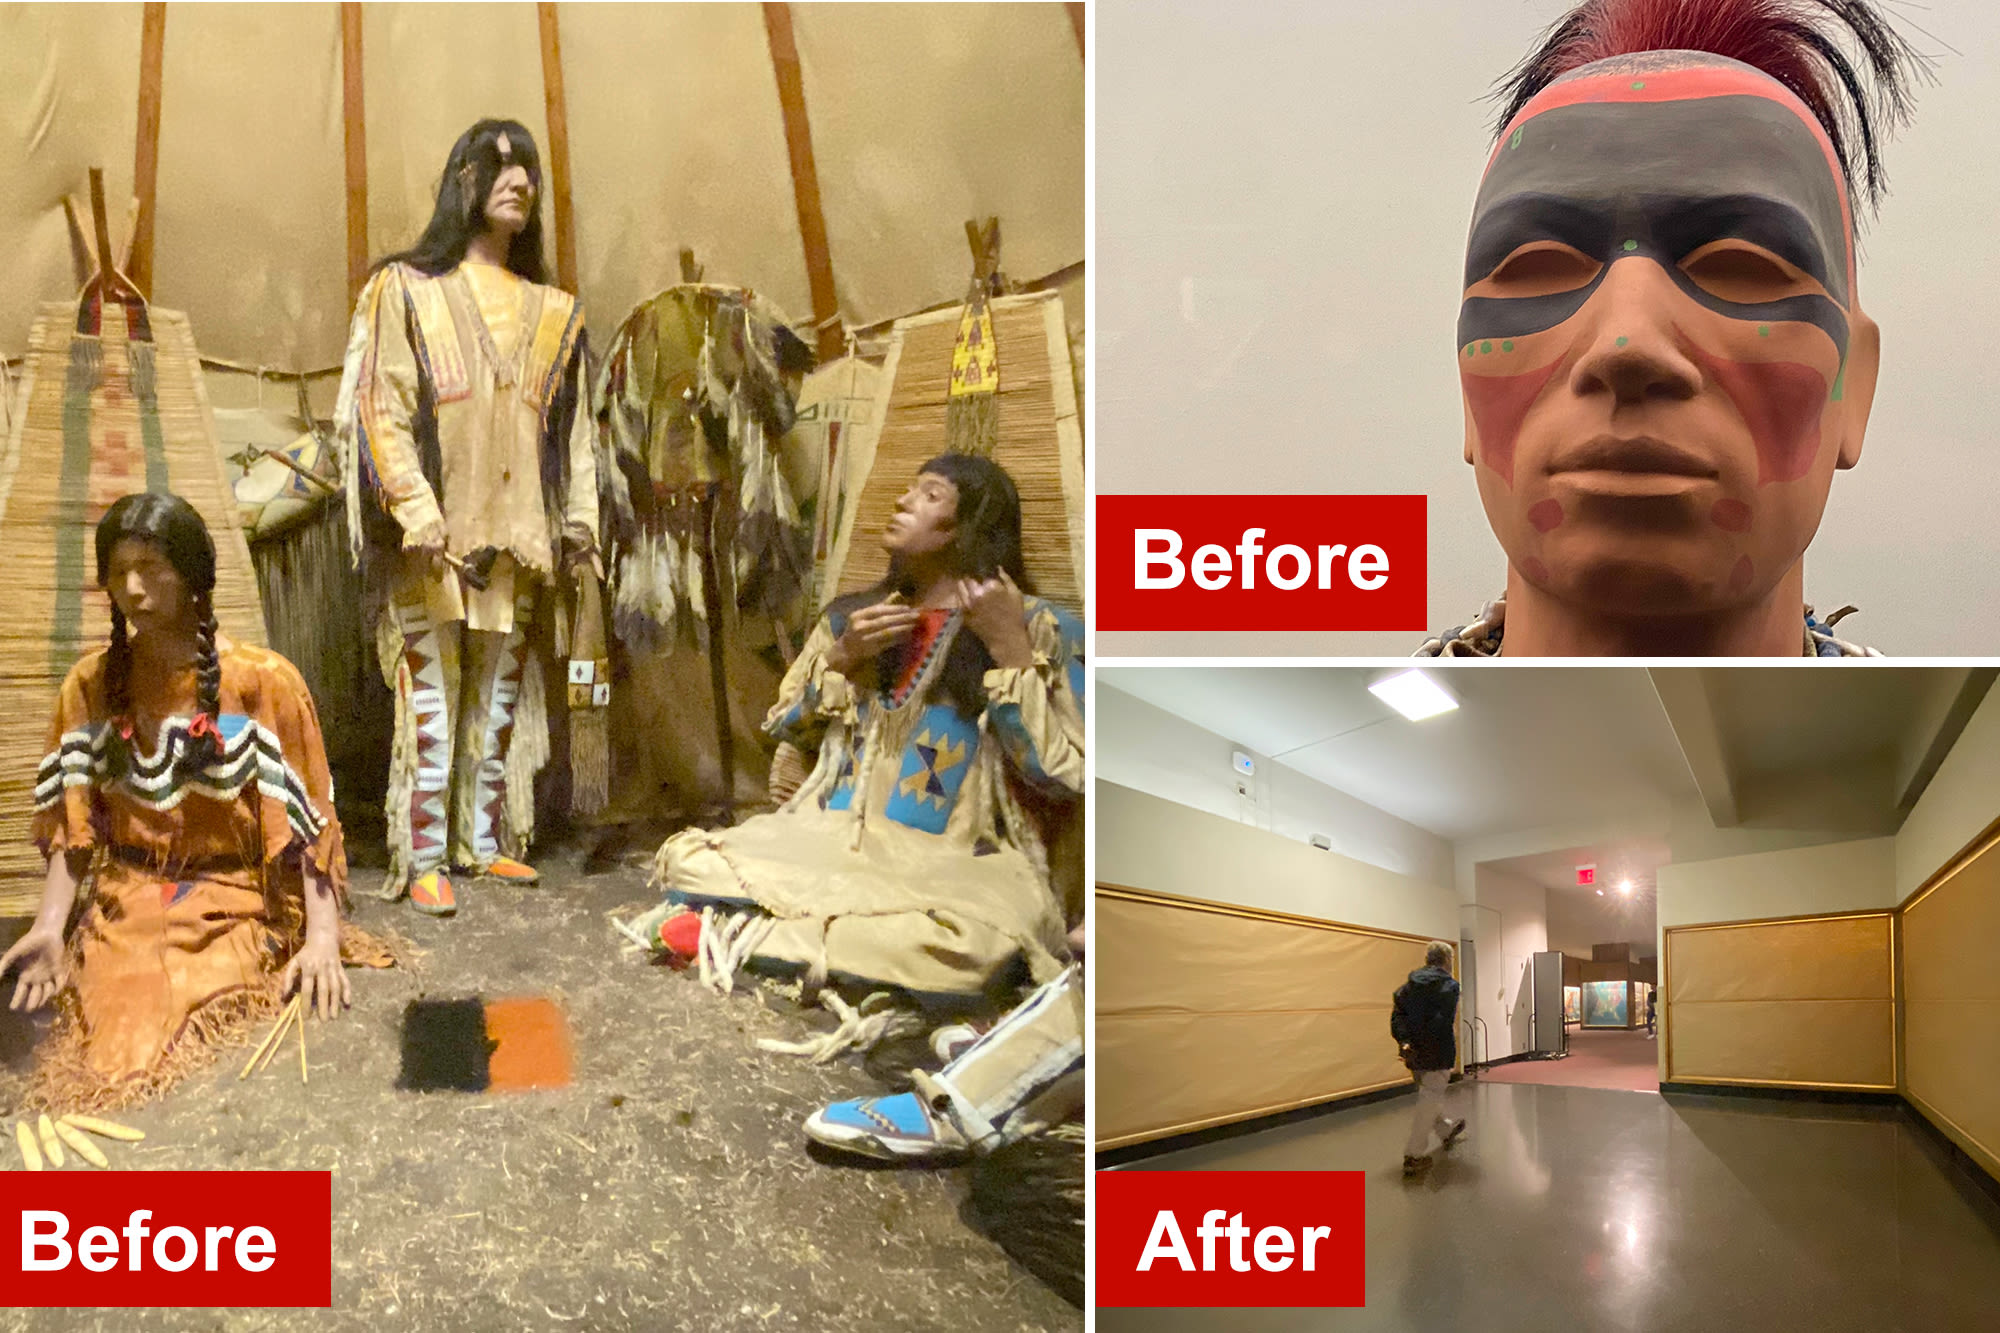 NYC Museum of Natural History under fire for shuttering Native American exhibit — then abandoning it to gather dust